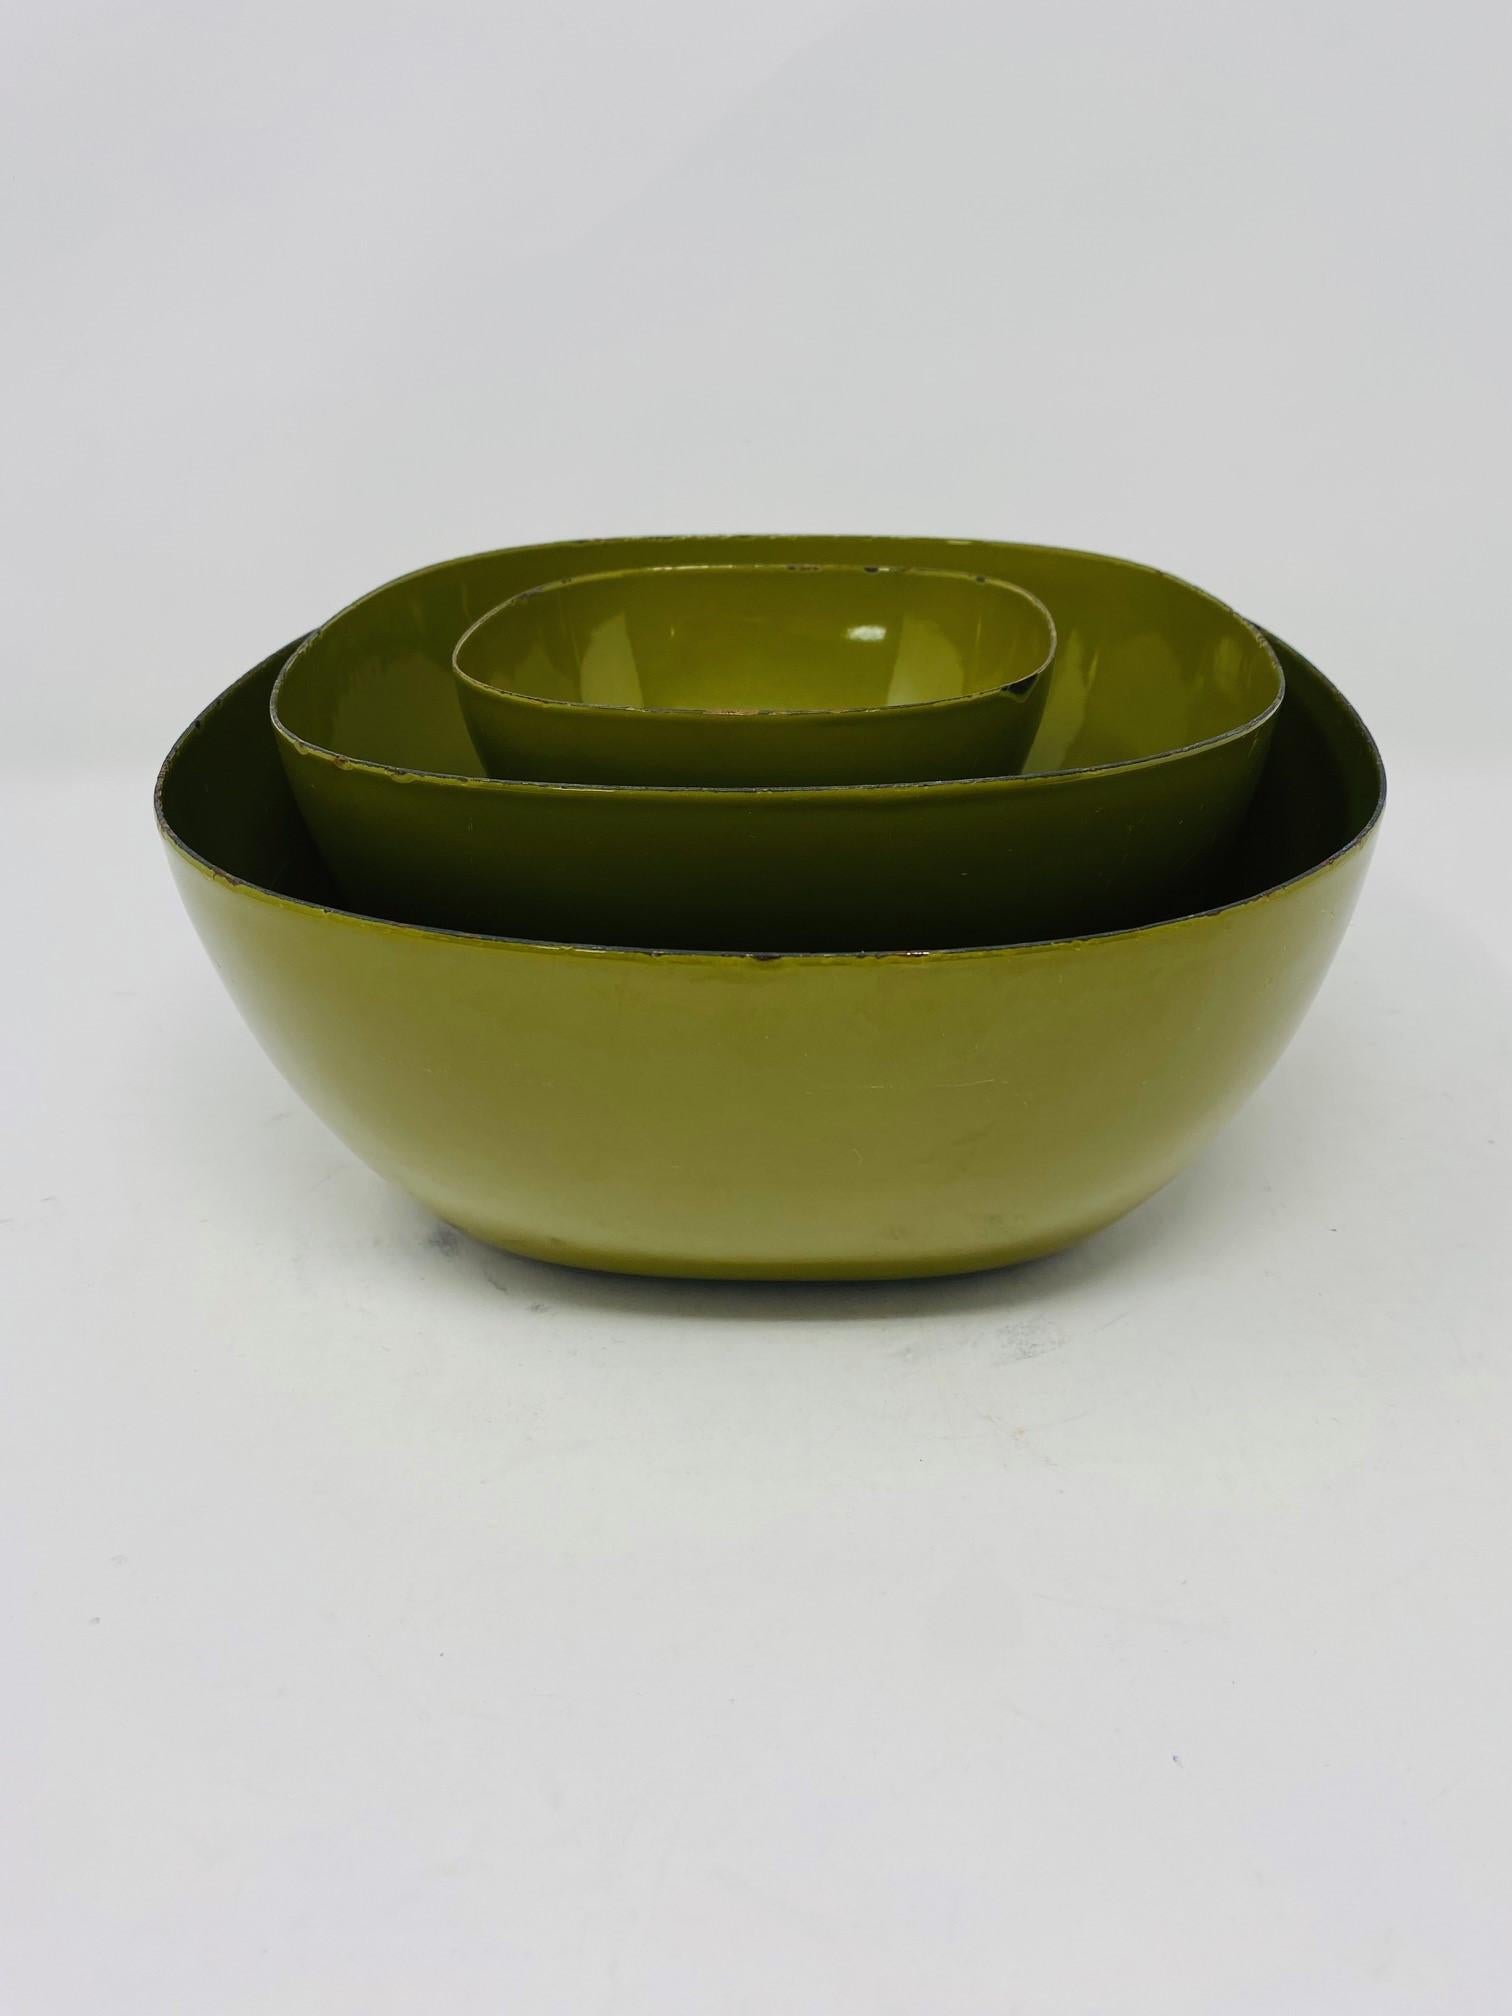 These Cathrineholm nesting bowls were manufactured in Holland for Graham Kerr, aka, The Galloping Gourmet. They are an avocado green color with a black edge that emphasizes the distinctive rounded square-shape design of that series.The bowls